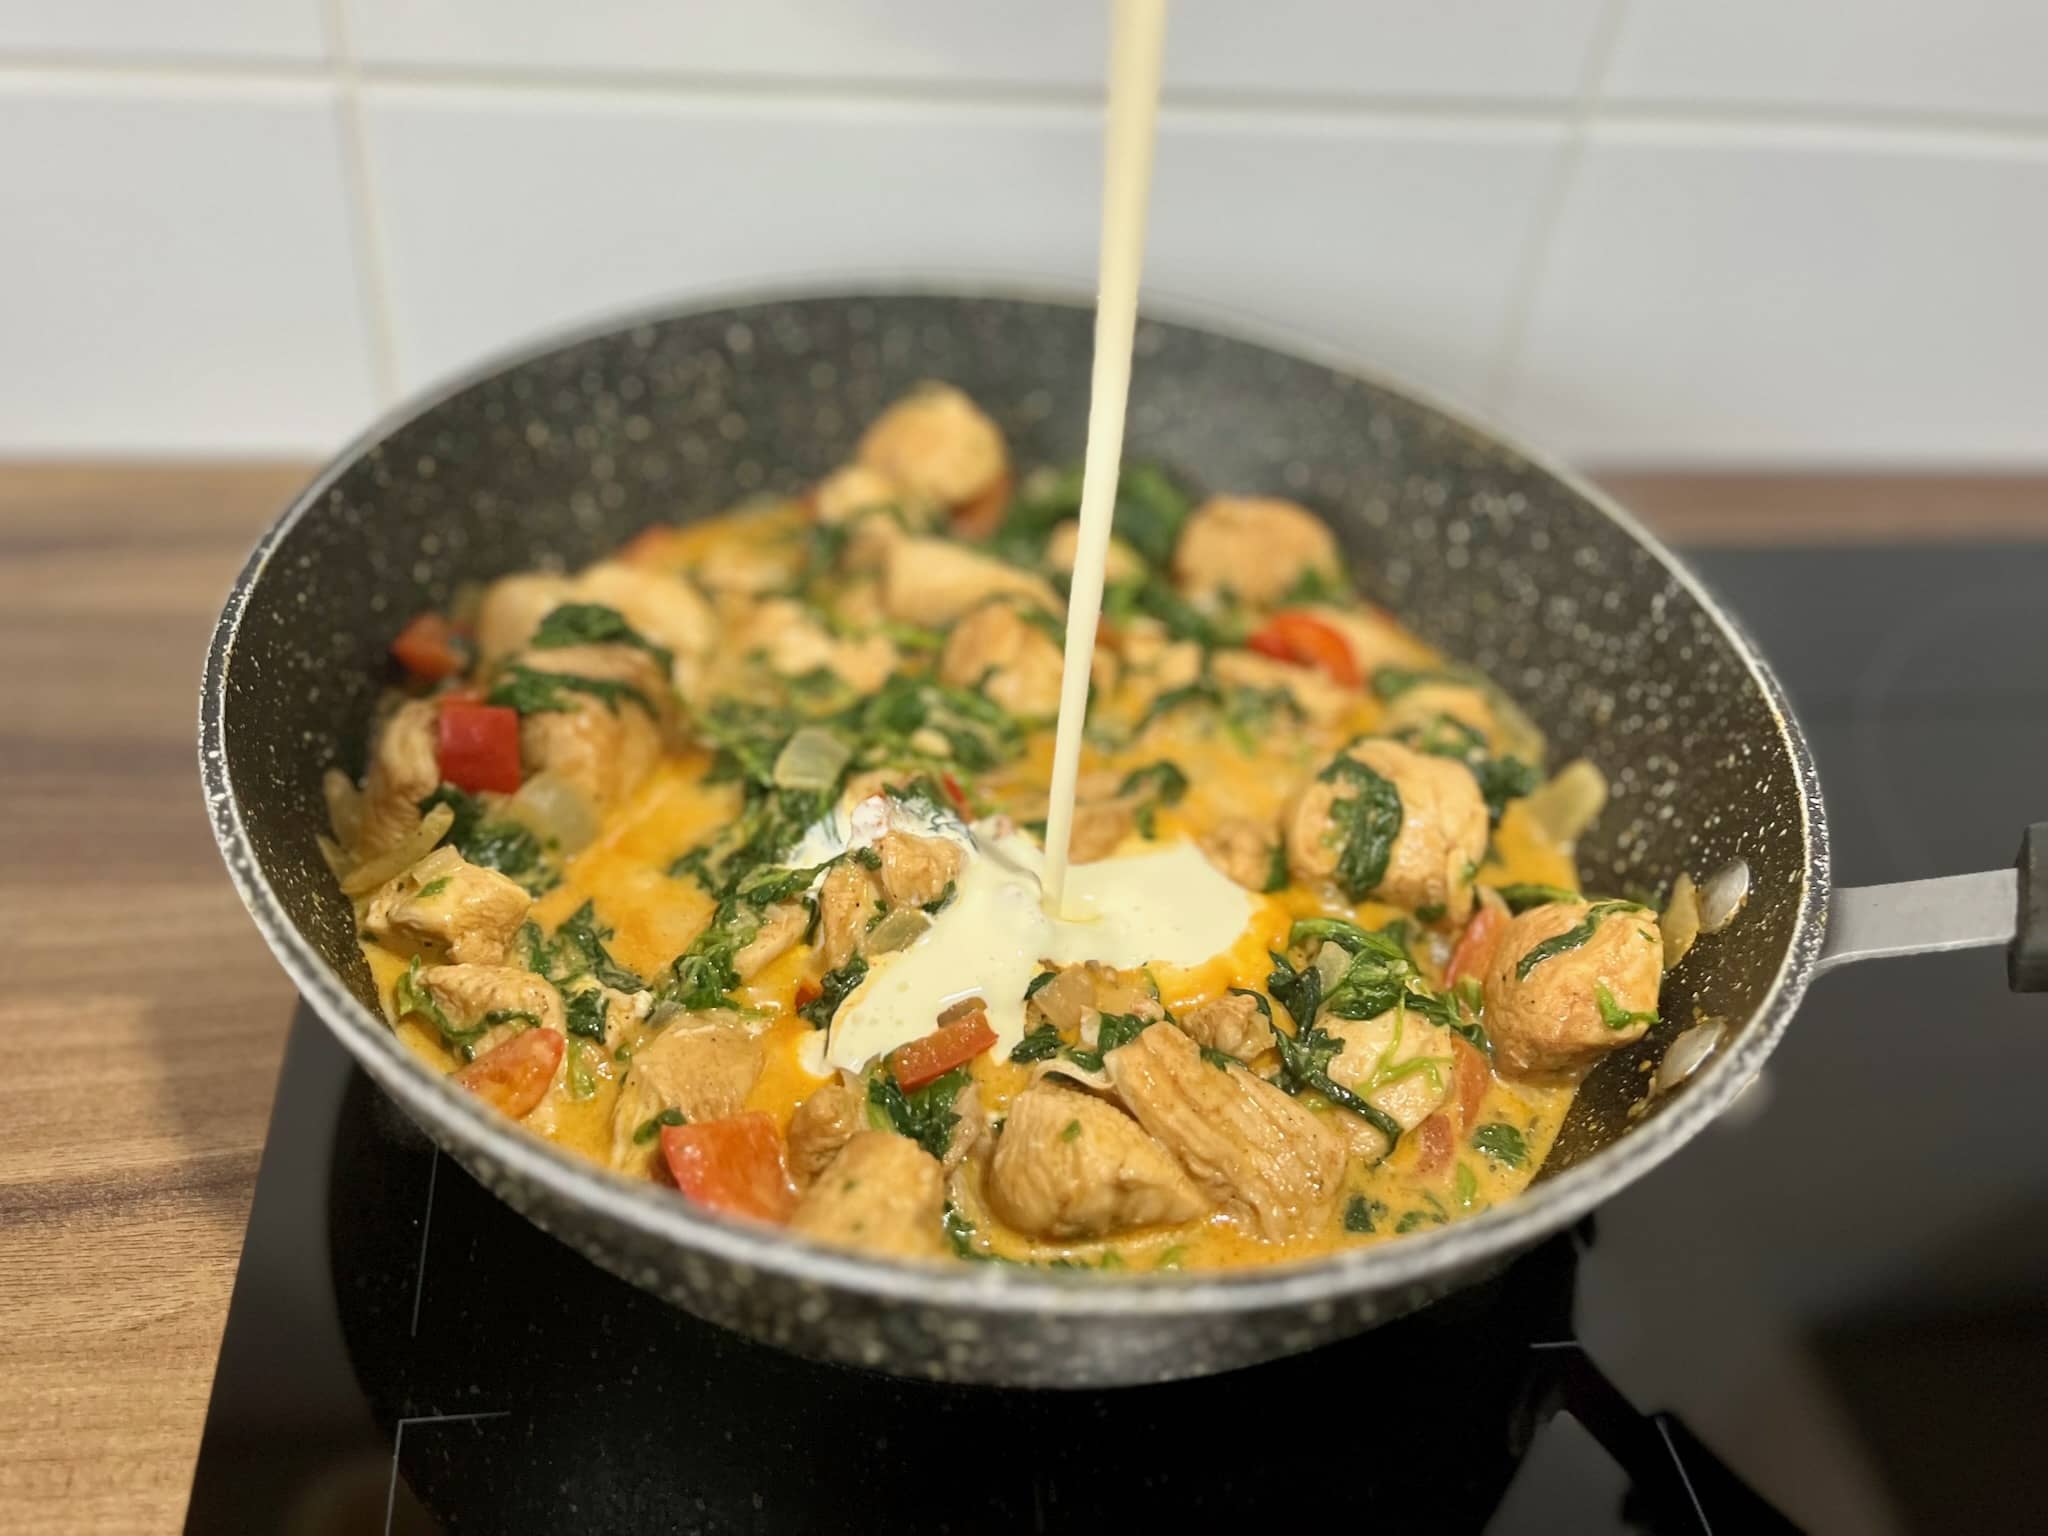 Pouring the double cream into a pan with chicken and vegetables